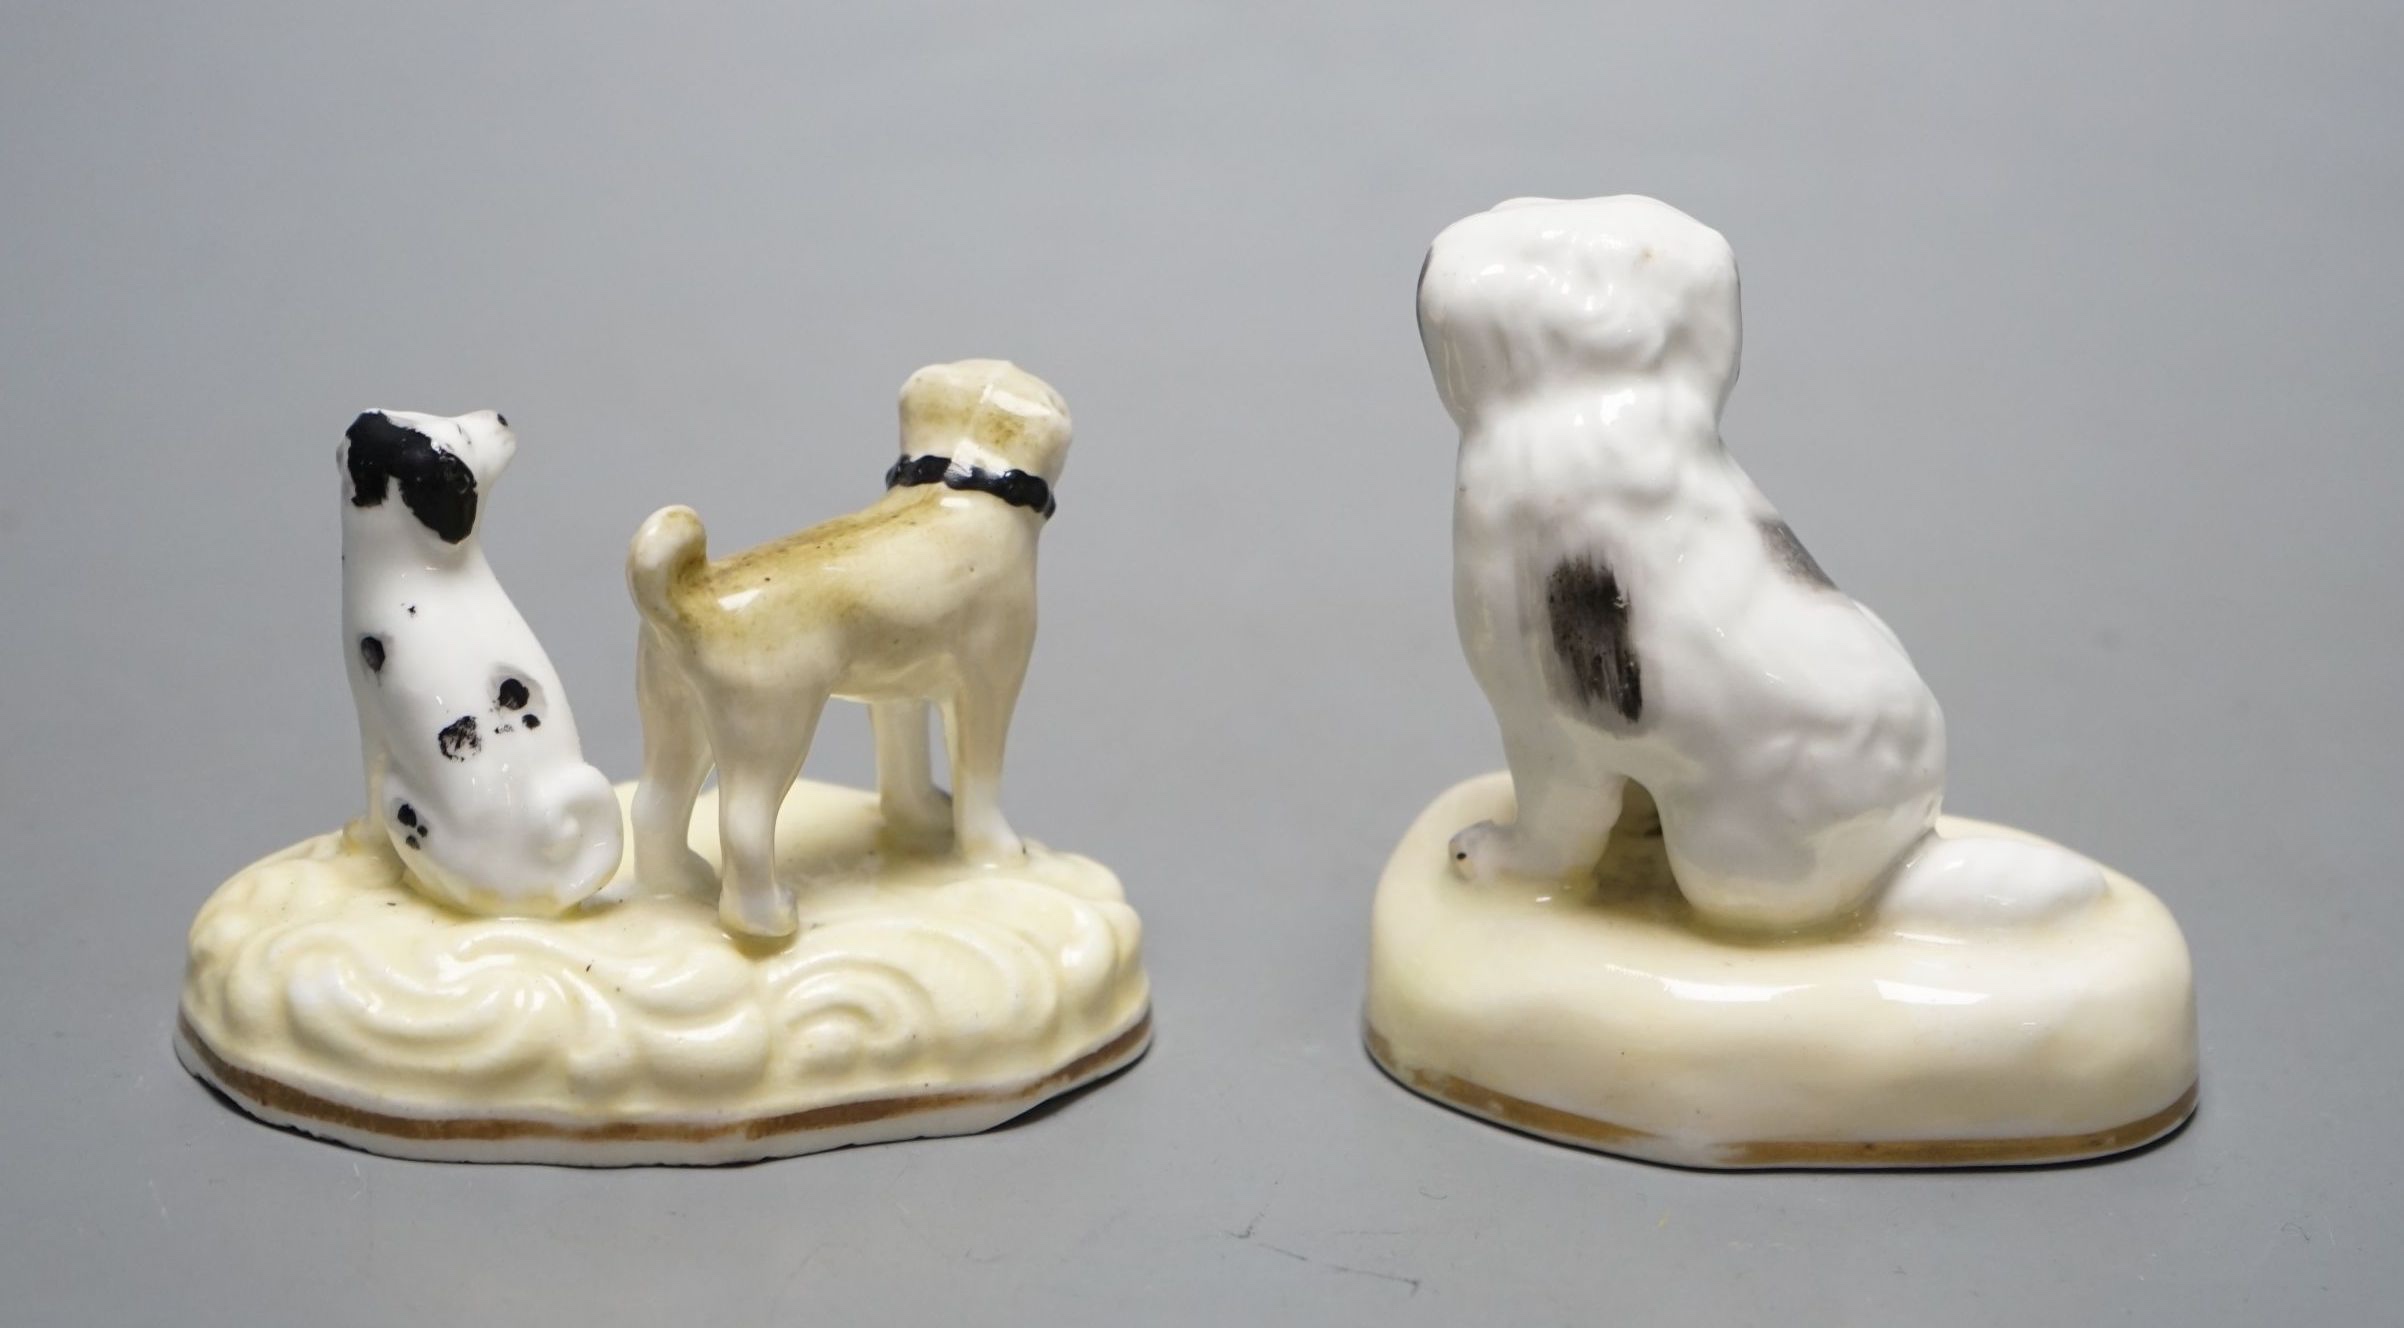 A Samuel Alcock porcelain a group of a pug dog and a spaniel, c.1835-50, together with a similar figure of a seated spaniel, impressed marks 342 and 183. Cf. Dennis G.Rice Dogs in English porcelain, colour plate 36 and f